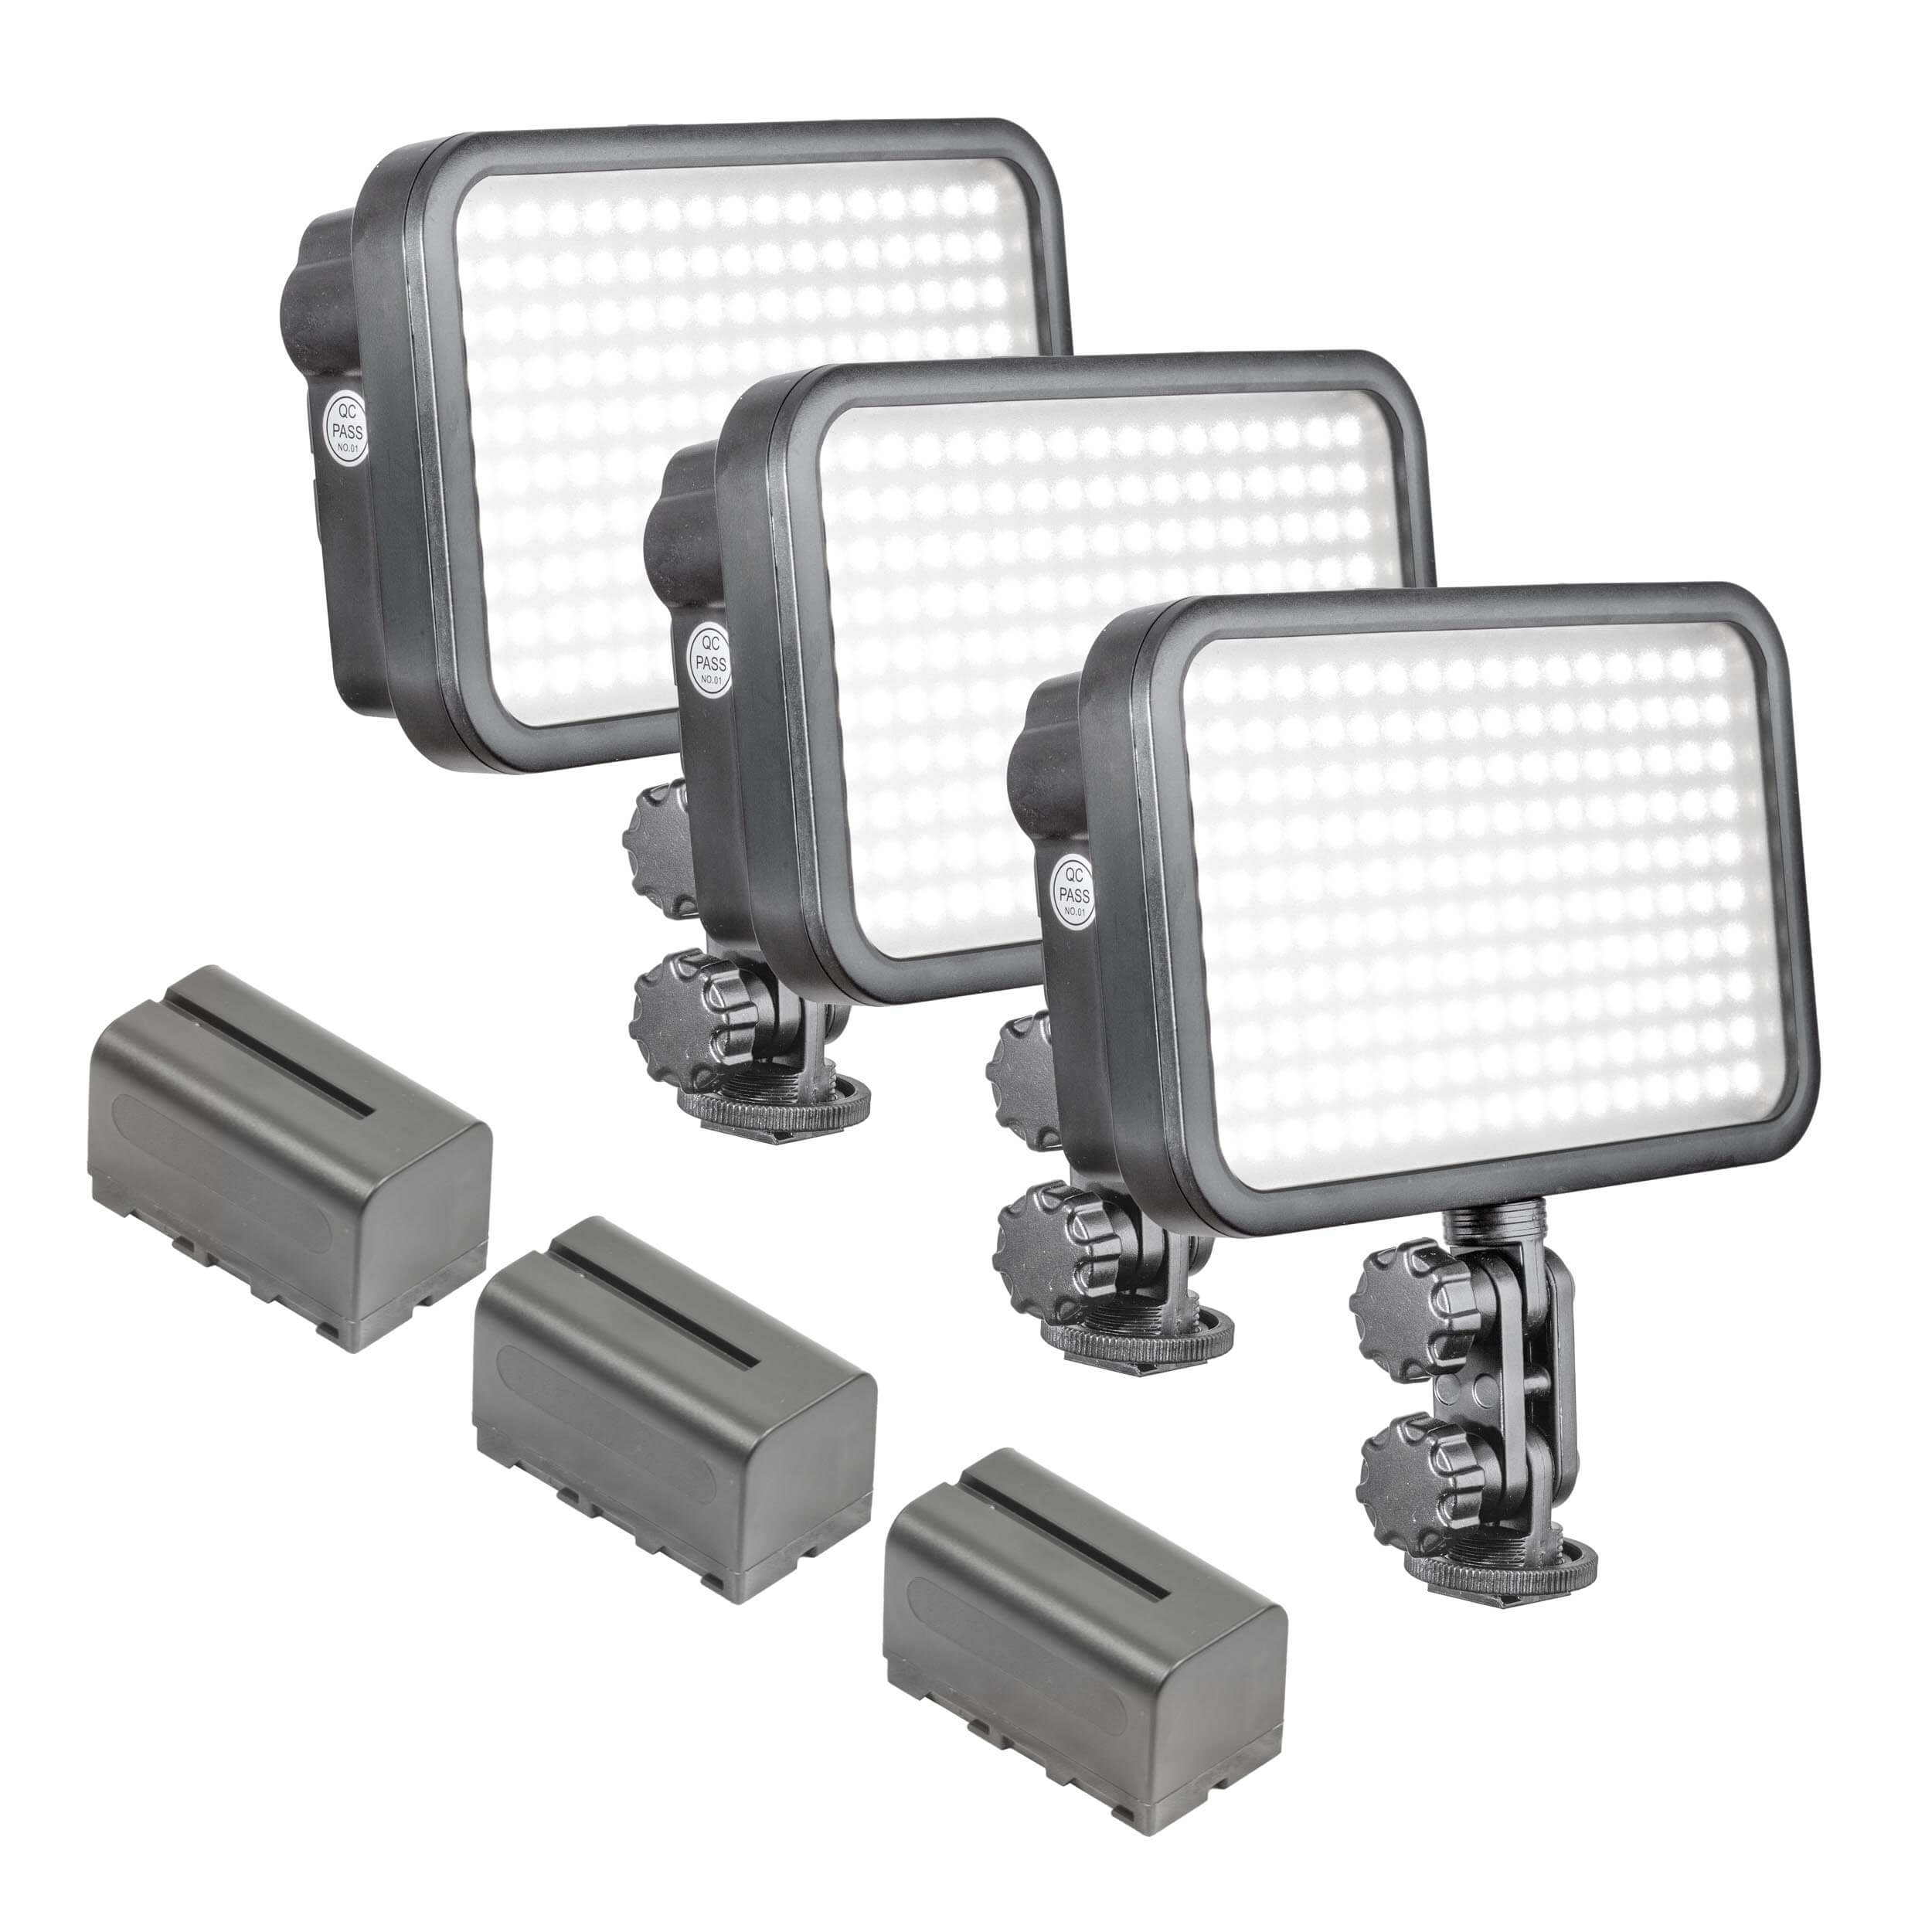 3x LED170 On Camera LED & 3 Rechargeable Batteries - PixaPro 